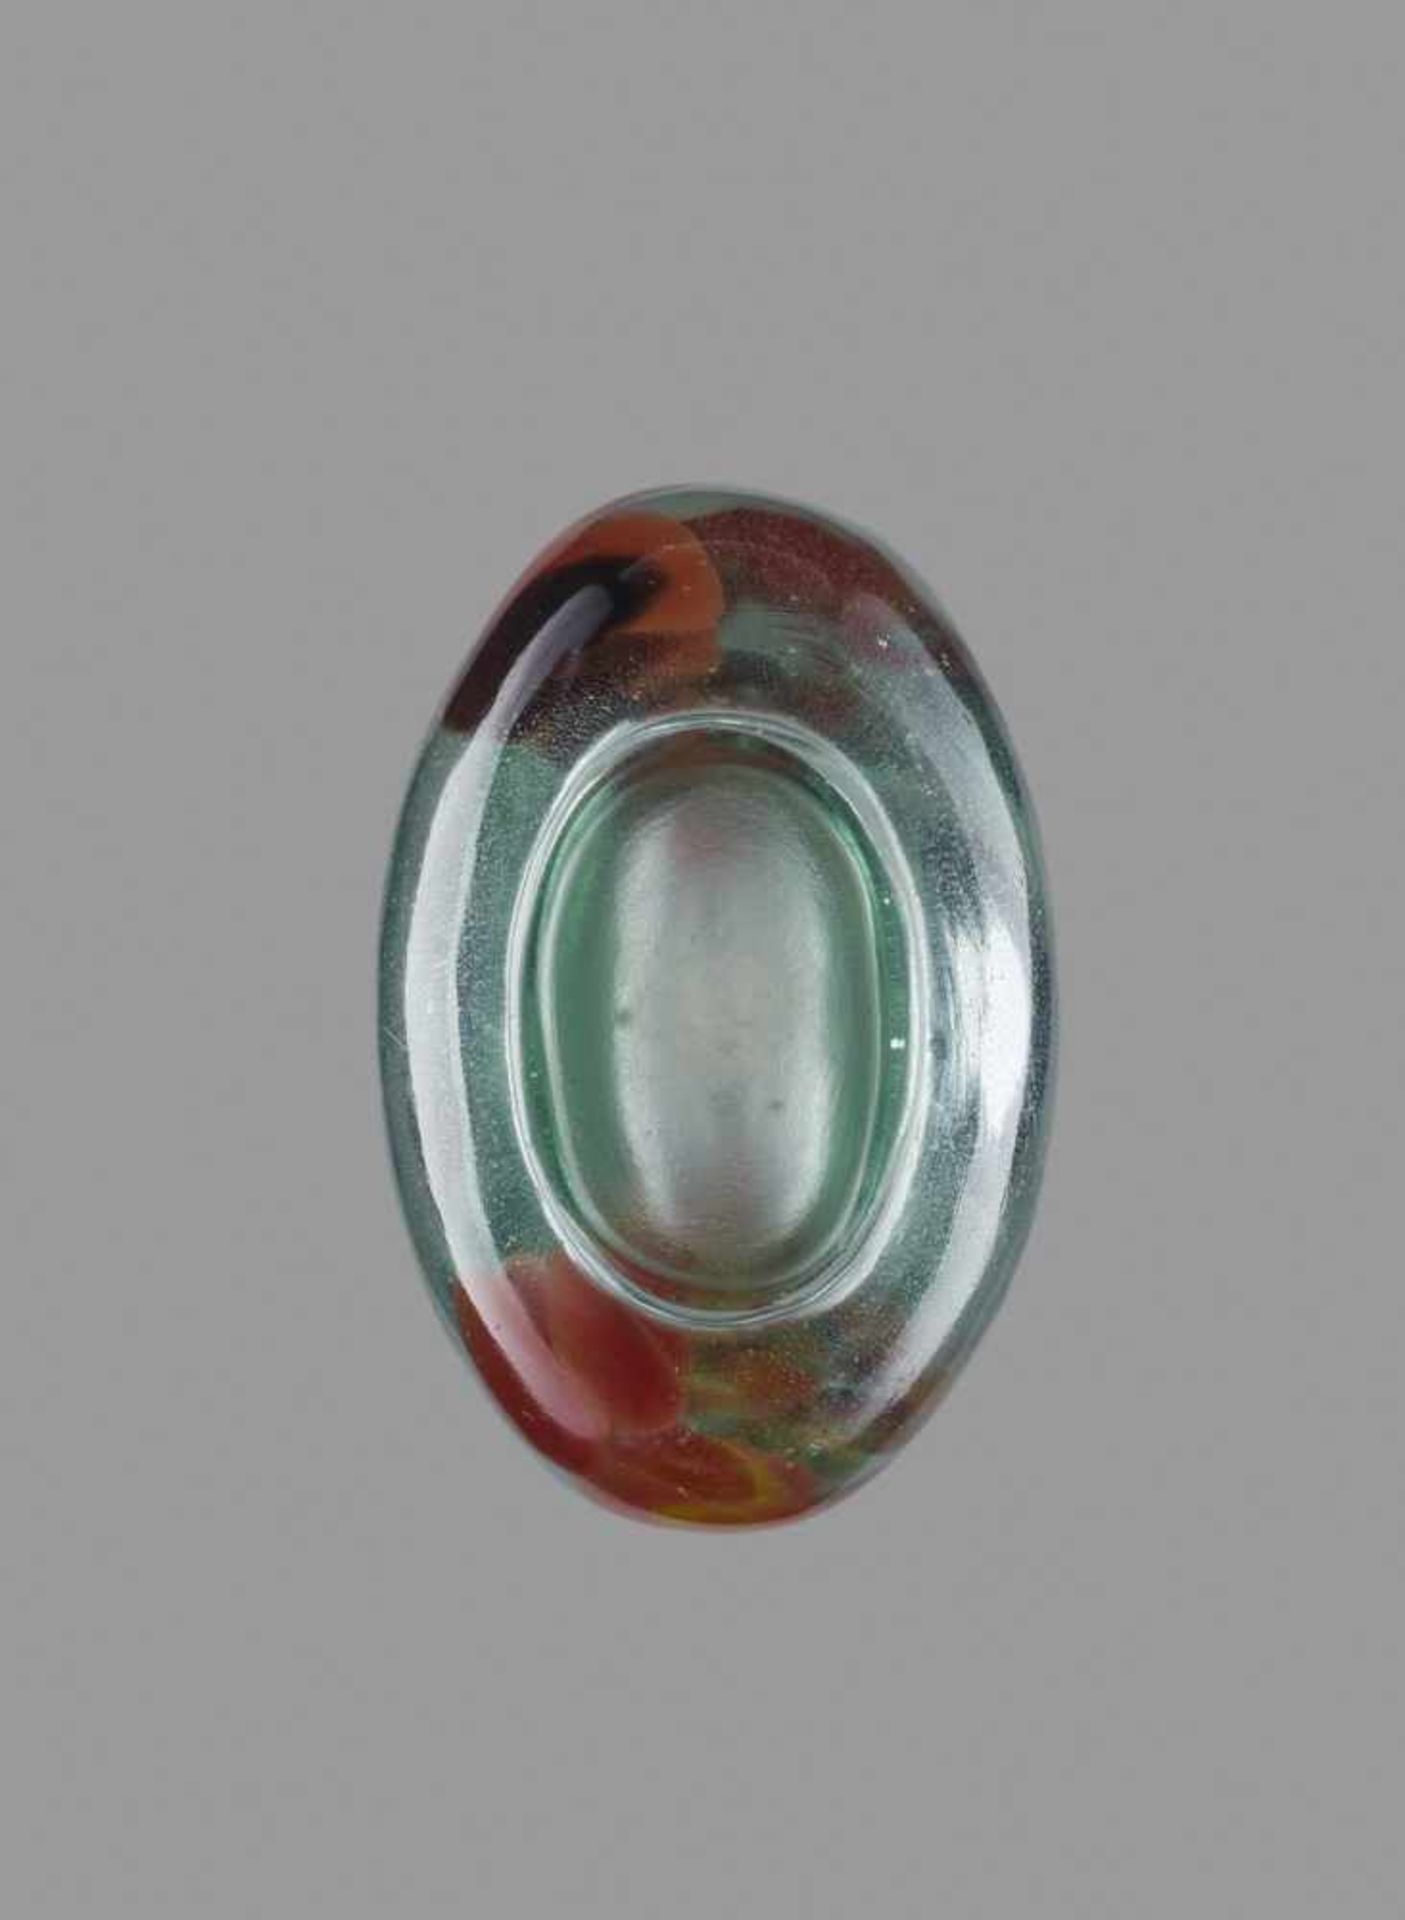 AN IRON-RED, YELLOW AND BROWN SANDWICHED AQUAMARINE GLASS SNUFF BOTTLE Bubble suffused glass body of - Image 6 of 6